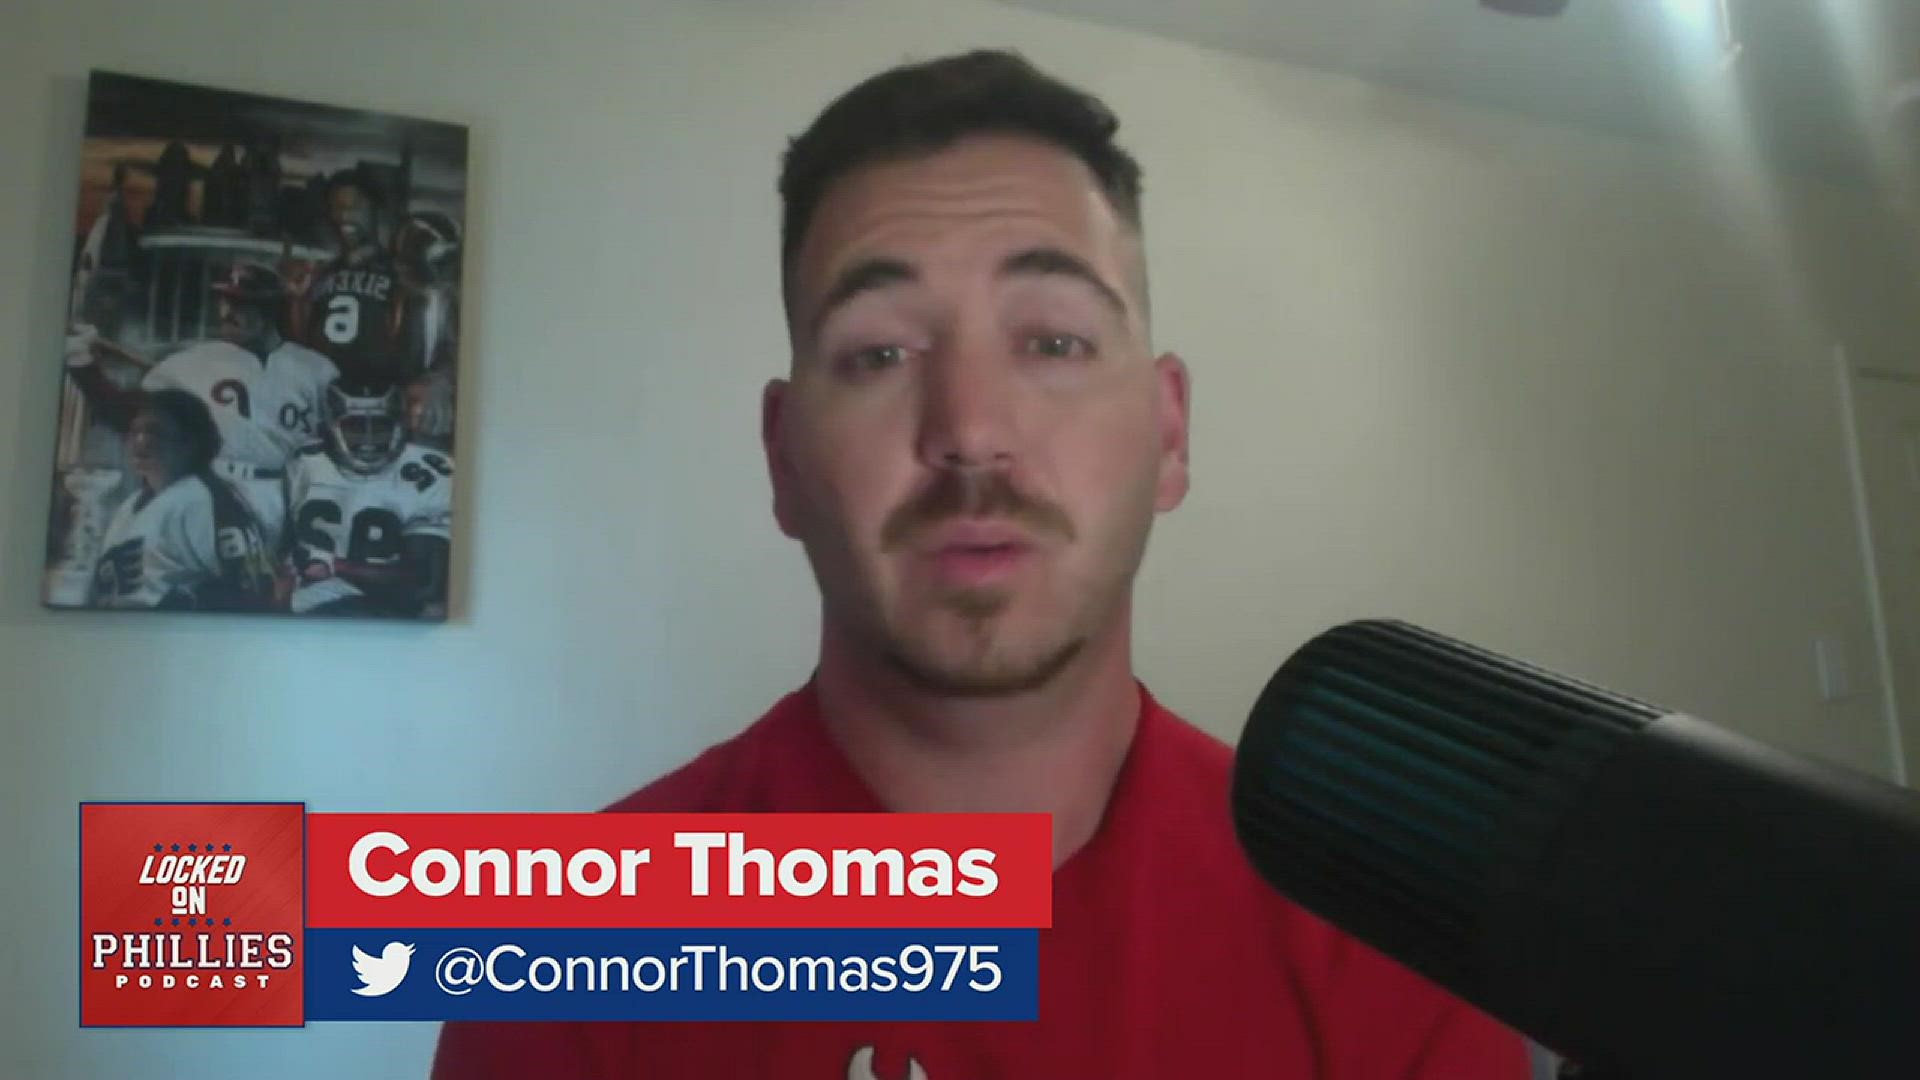 In today's episode, Connor discusses the latest extra innings loss by the Philadelphia Phillies at the hands of the San Francisco Giants.